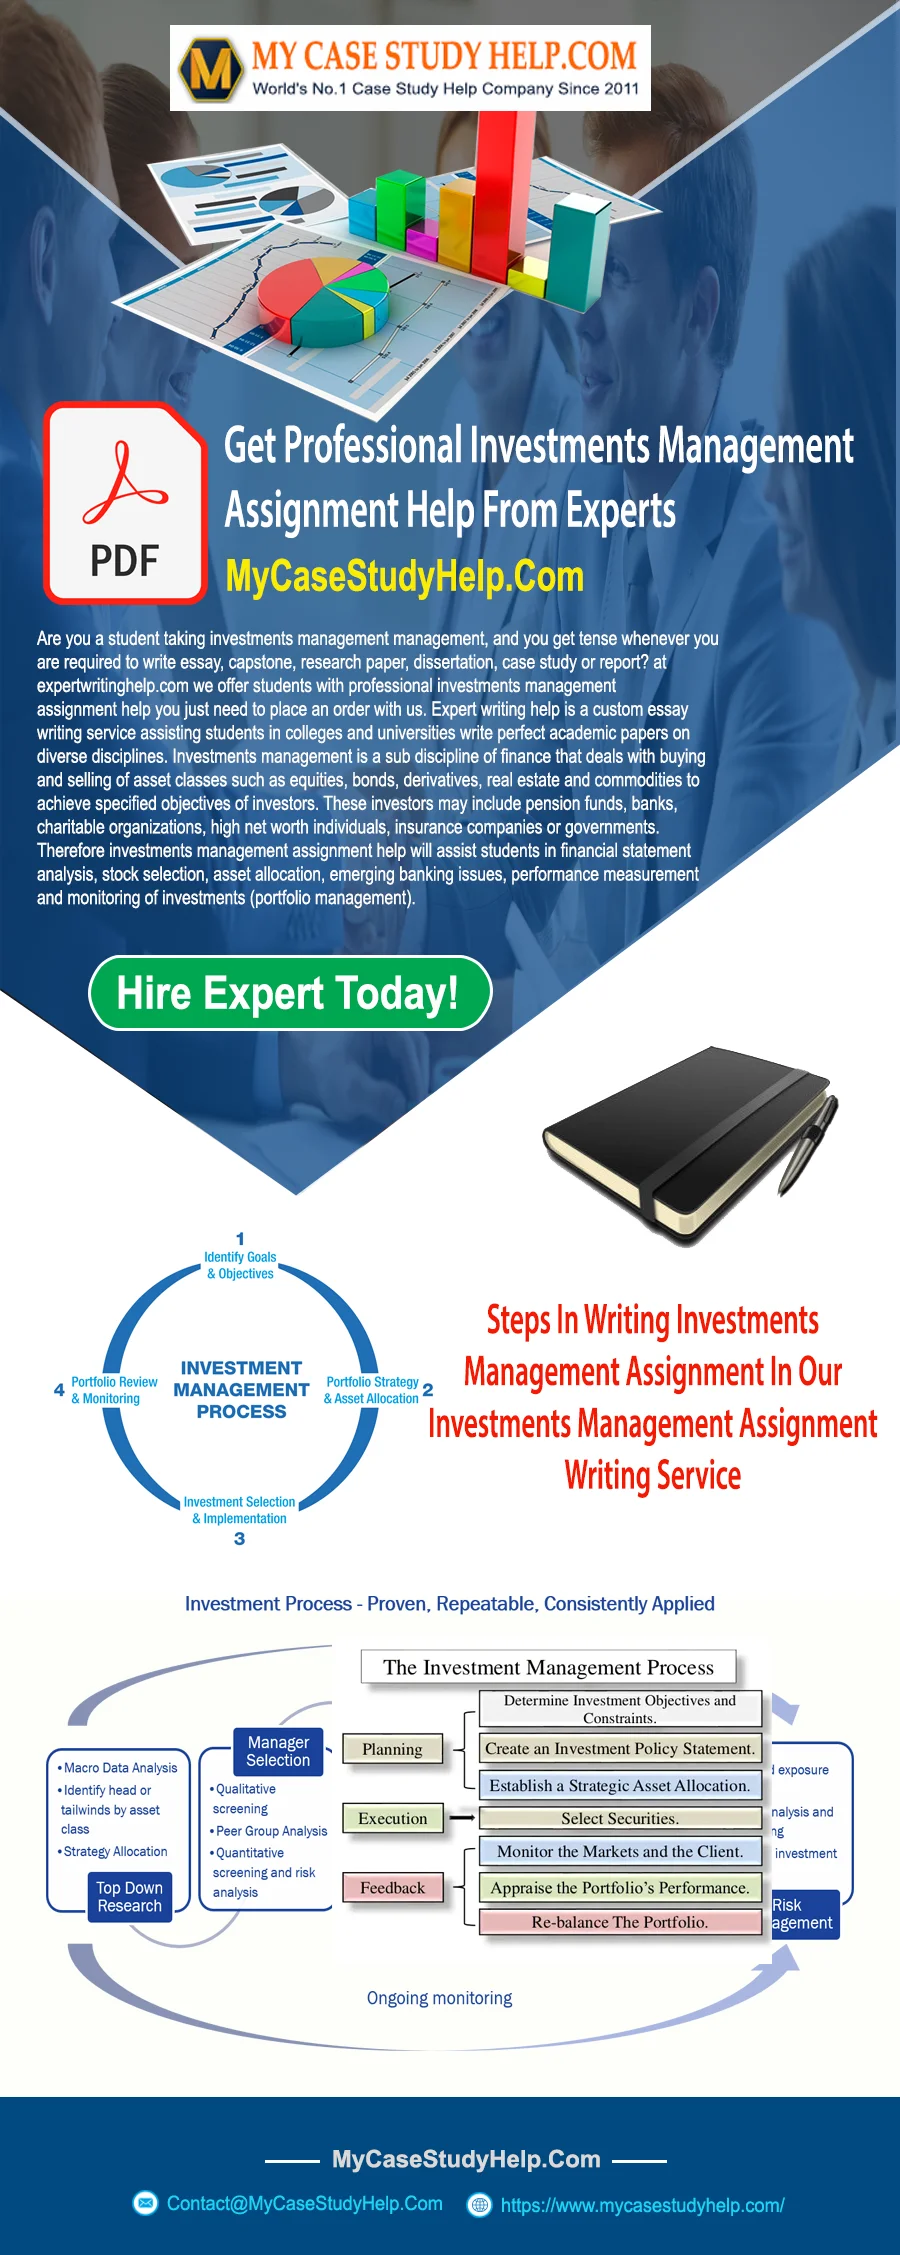 How To Write Investment Management Case Study Assignment?